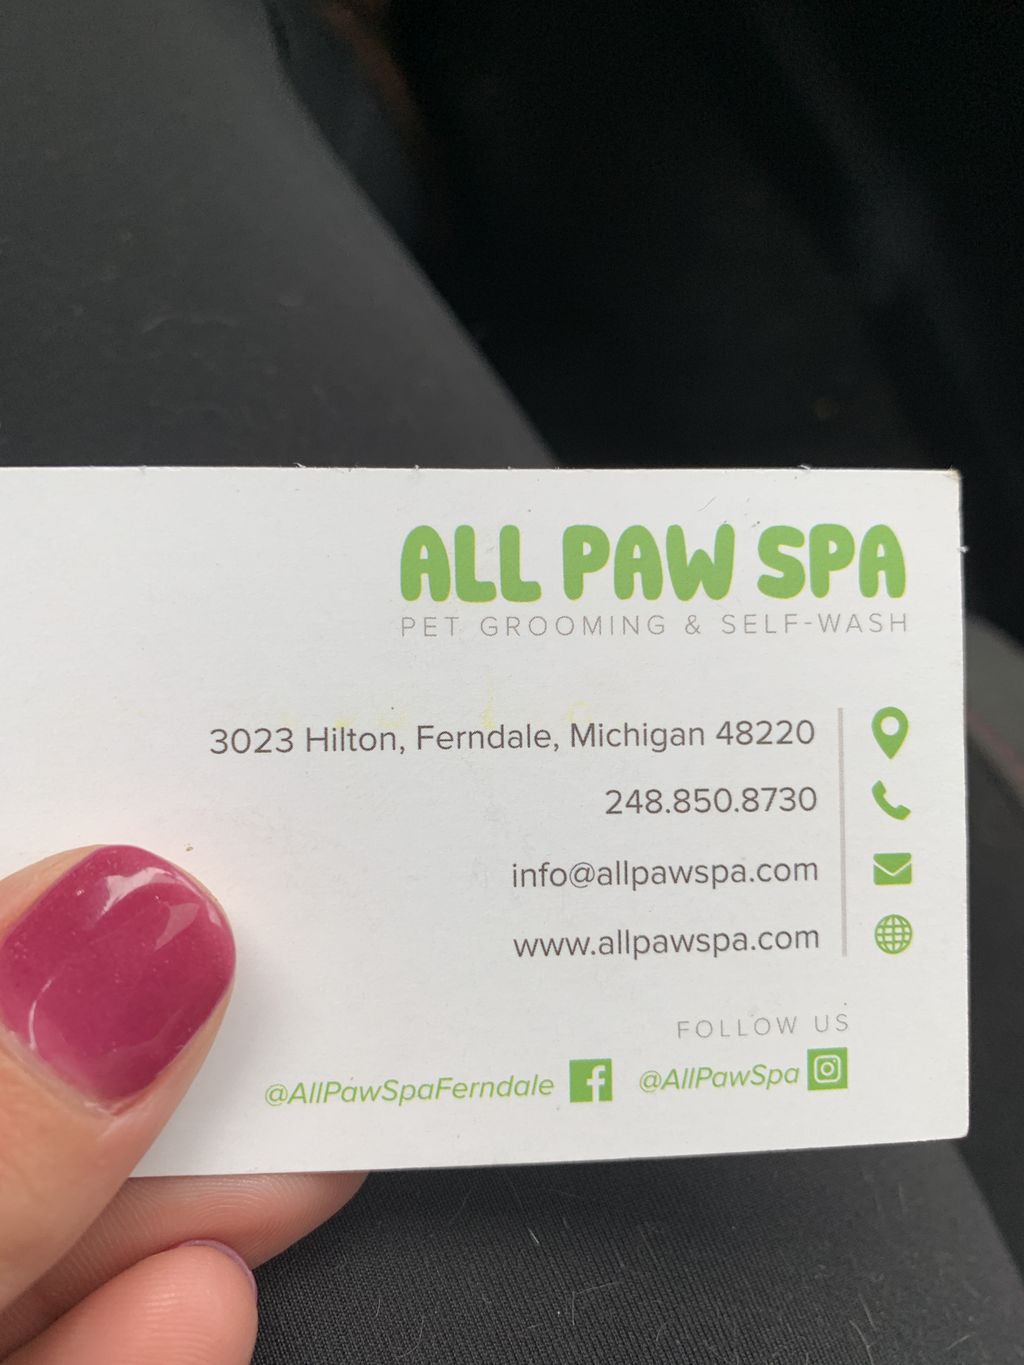 ALL PAW SPA